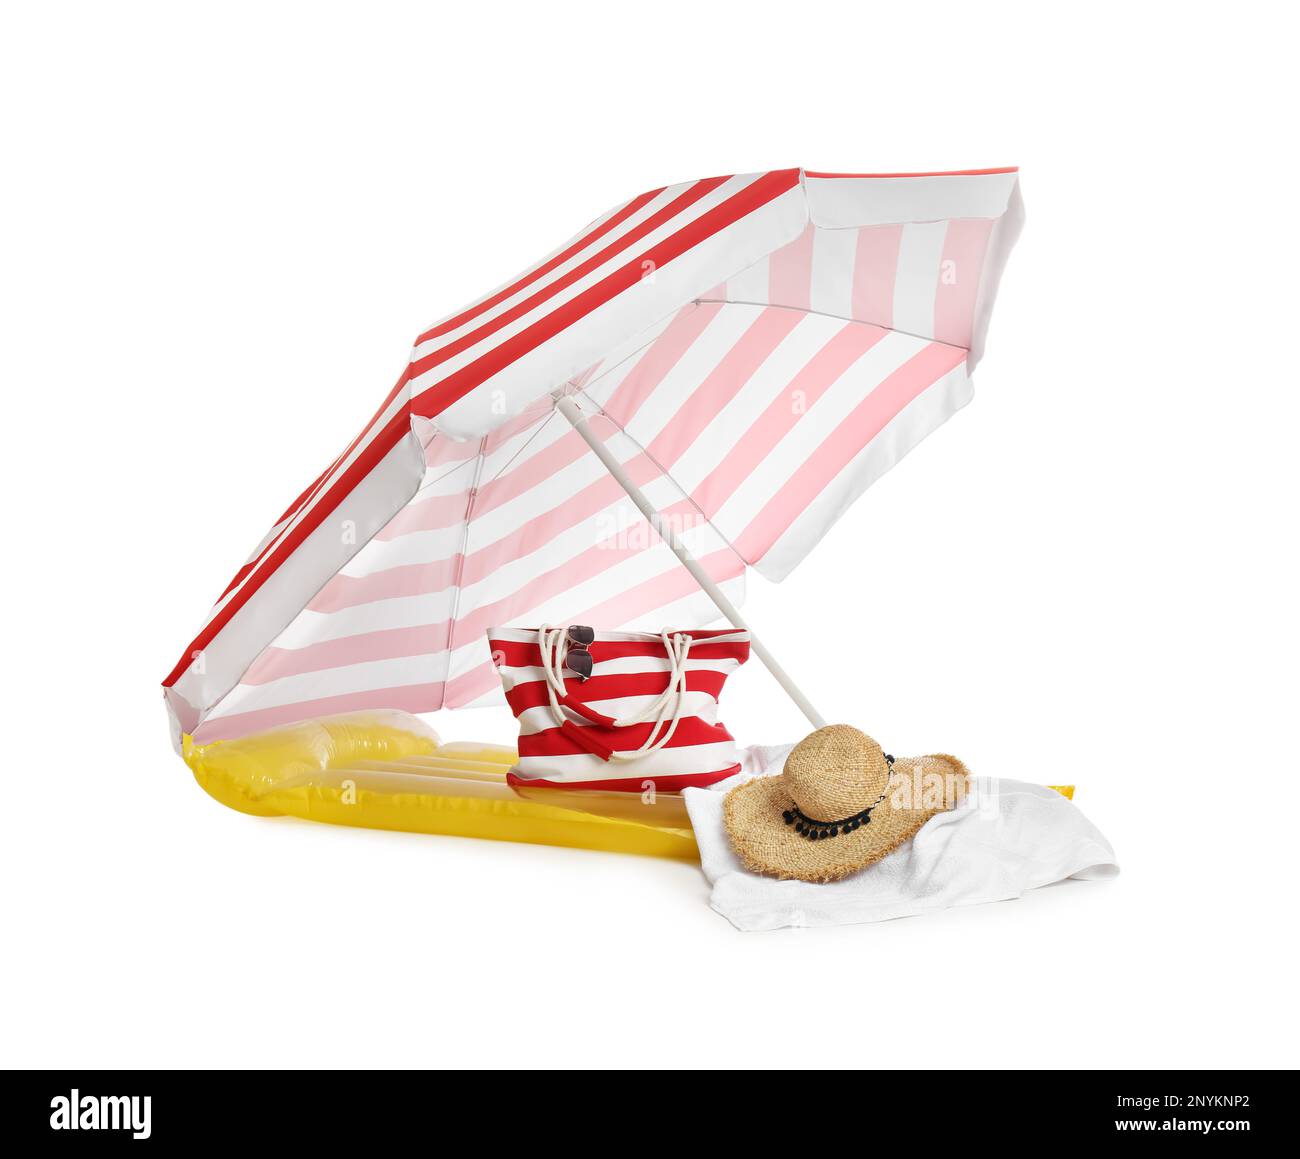 Open striped beach umbrella, inflatable mattress, bag and accessories on white background Stock Photo